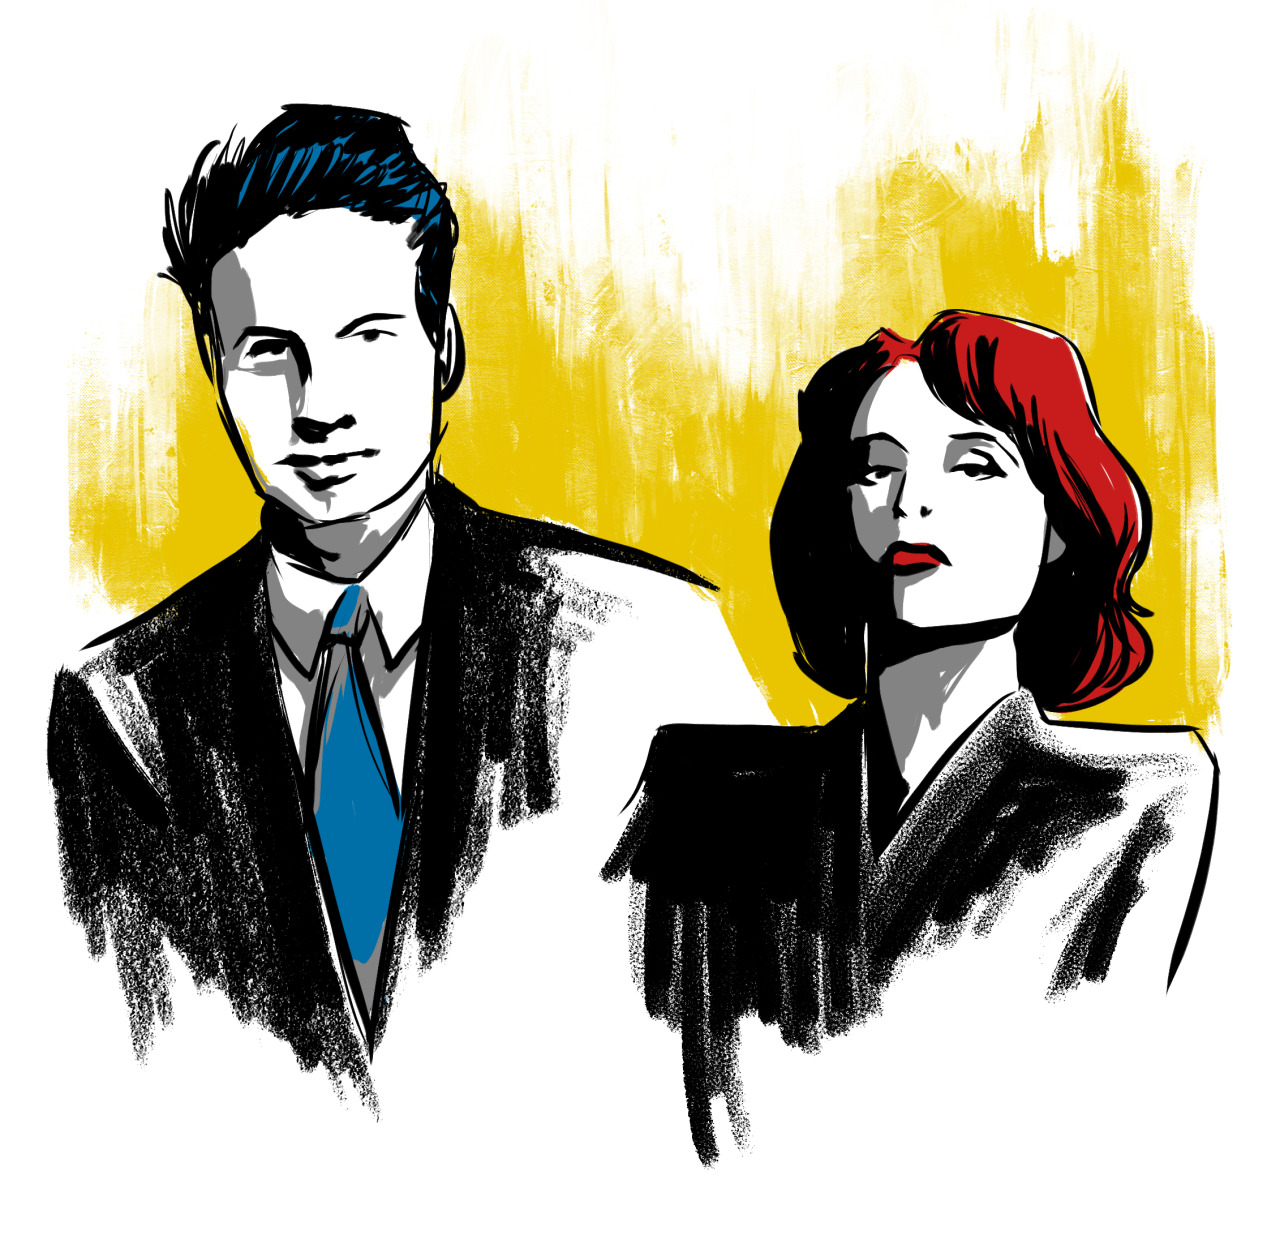 finchfish:
“ I’ve been watching X-files on Netflix… and I forgot how much I shipped these two.
”